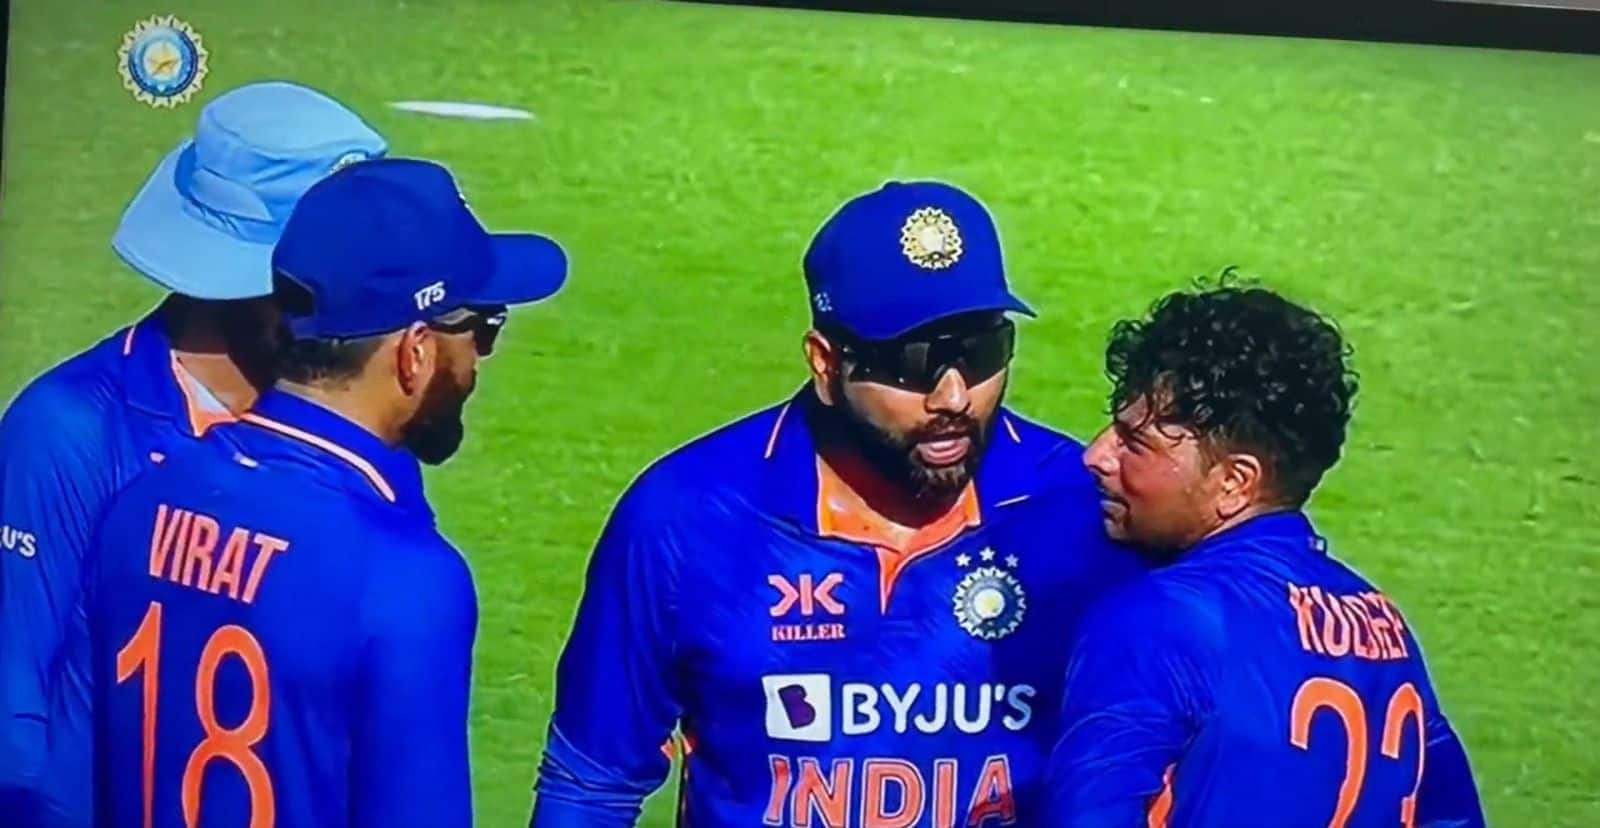 Ind vs Aus: Rohit Sharma Gets Angry On Kuldeep Yadav After DRS Blunder